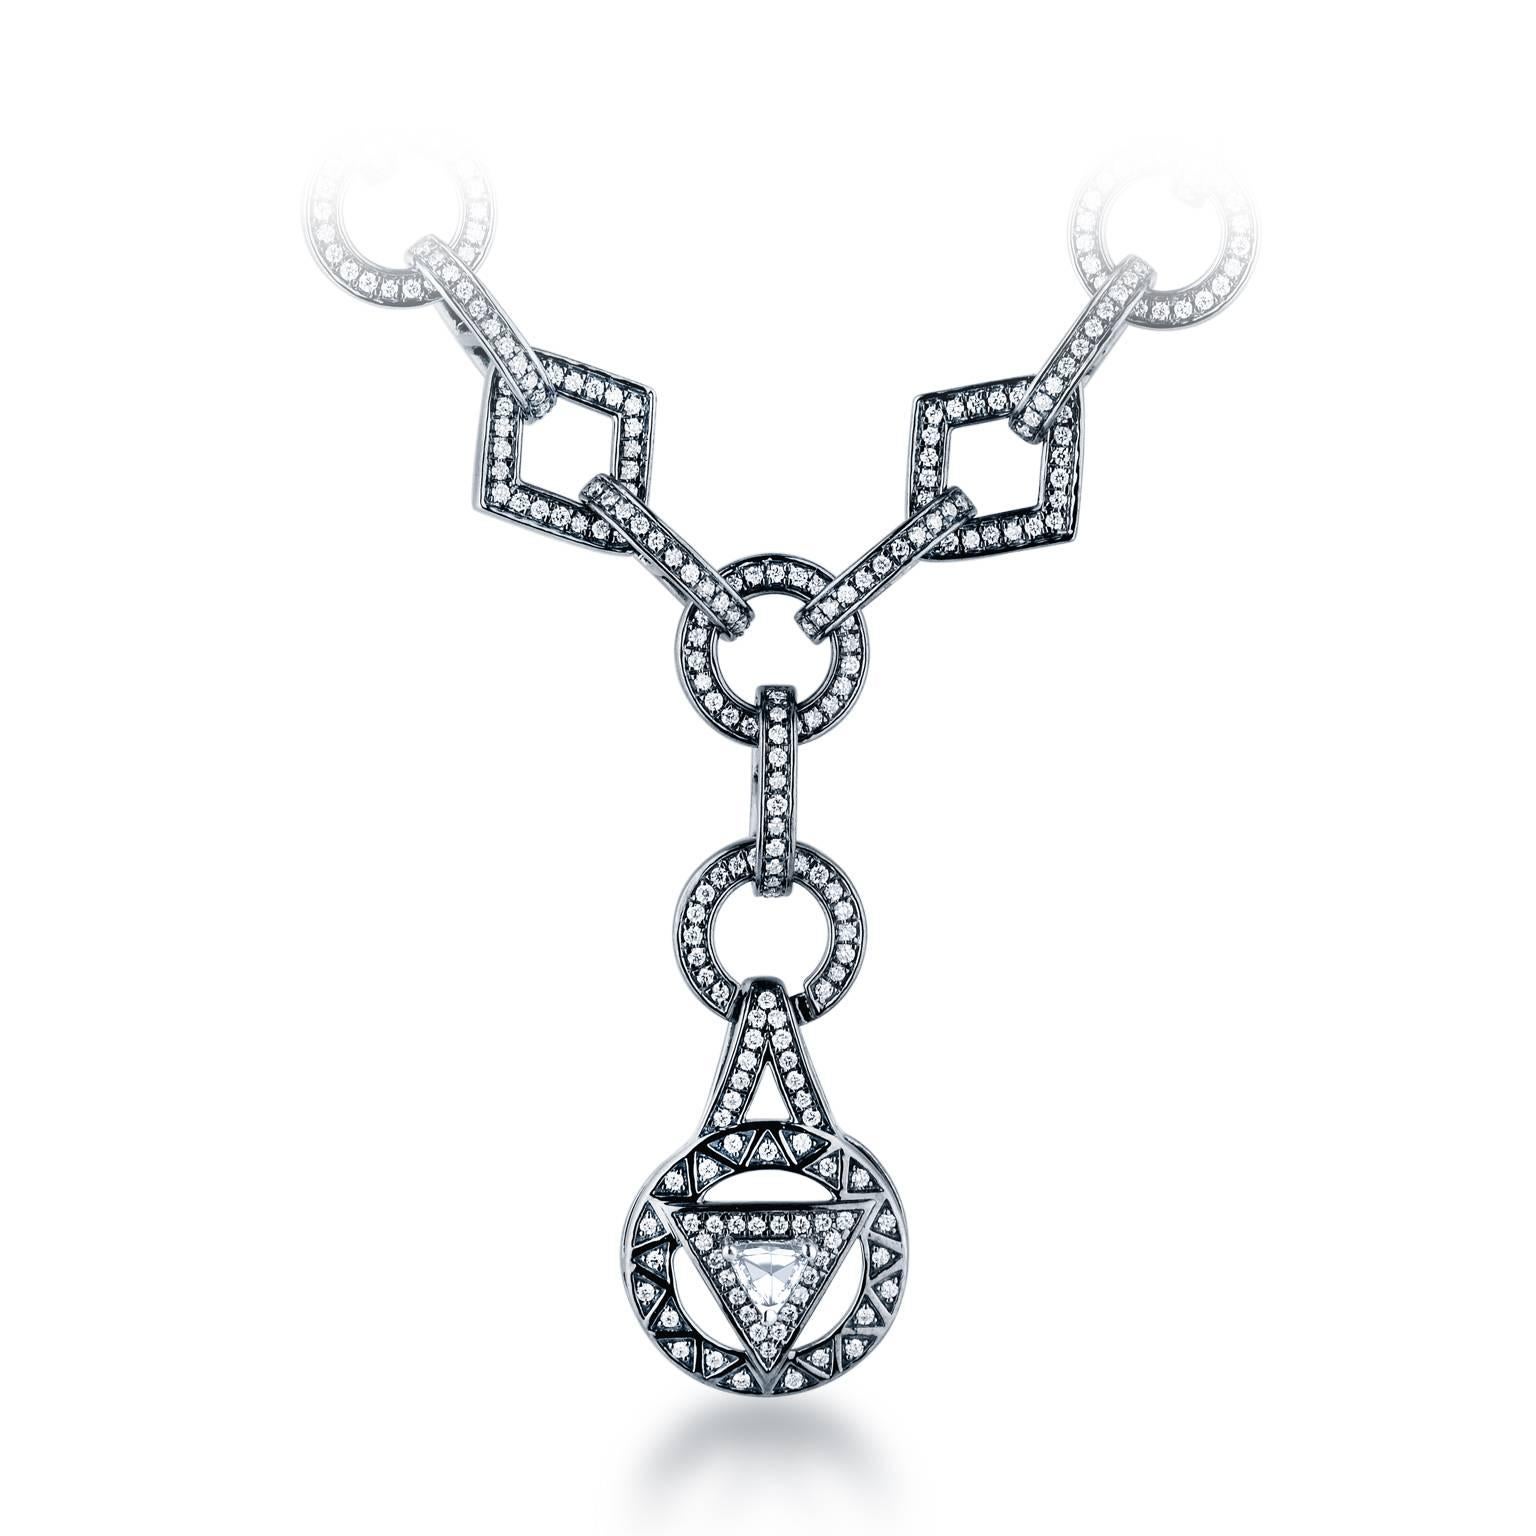 WHITE TRILLION ROSE CUT POINTER WITH WHITE ROUND DIAMONDS IN A TRIANGULUM NECKLACE
TOTAL DIAMOND CARAT WEIGHT 1.67 CTW
DIAMOND QUALITY SI1
IN 18KT WHITE GOLD 
Made in India
